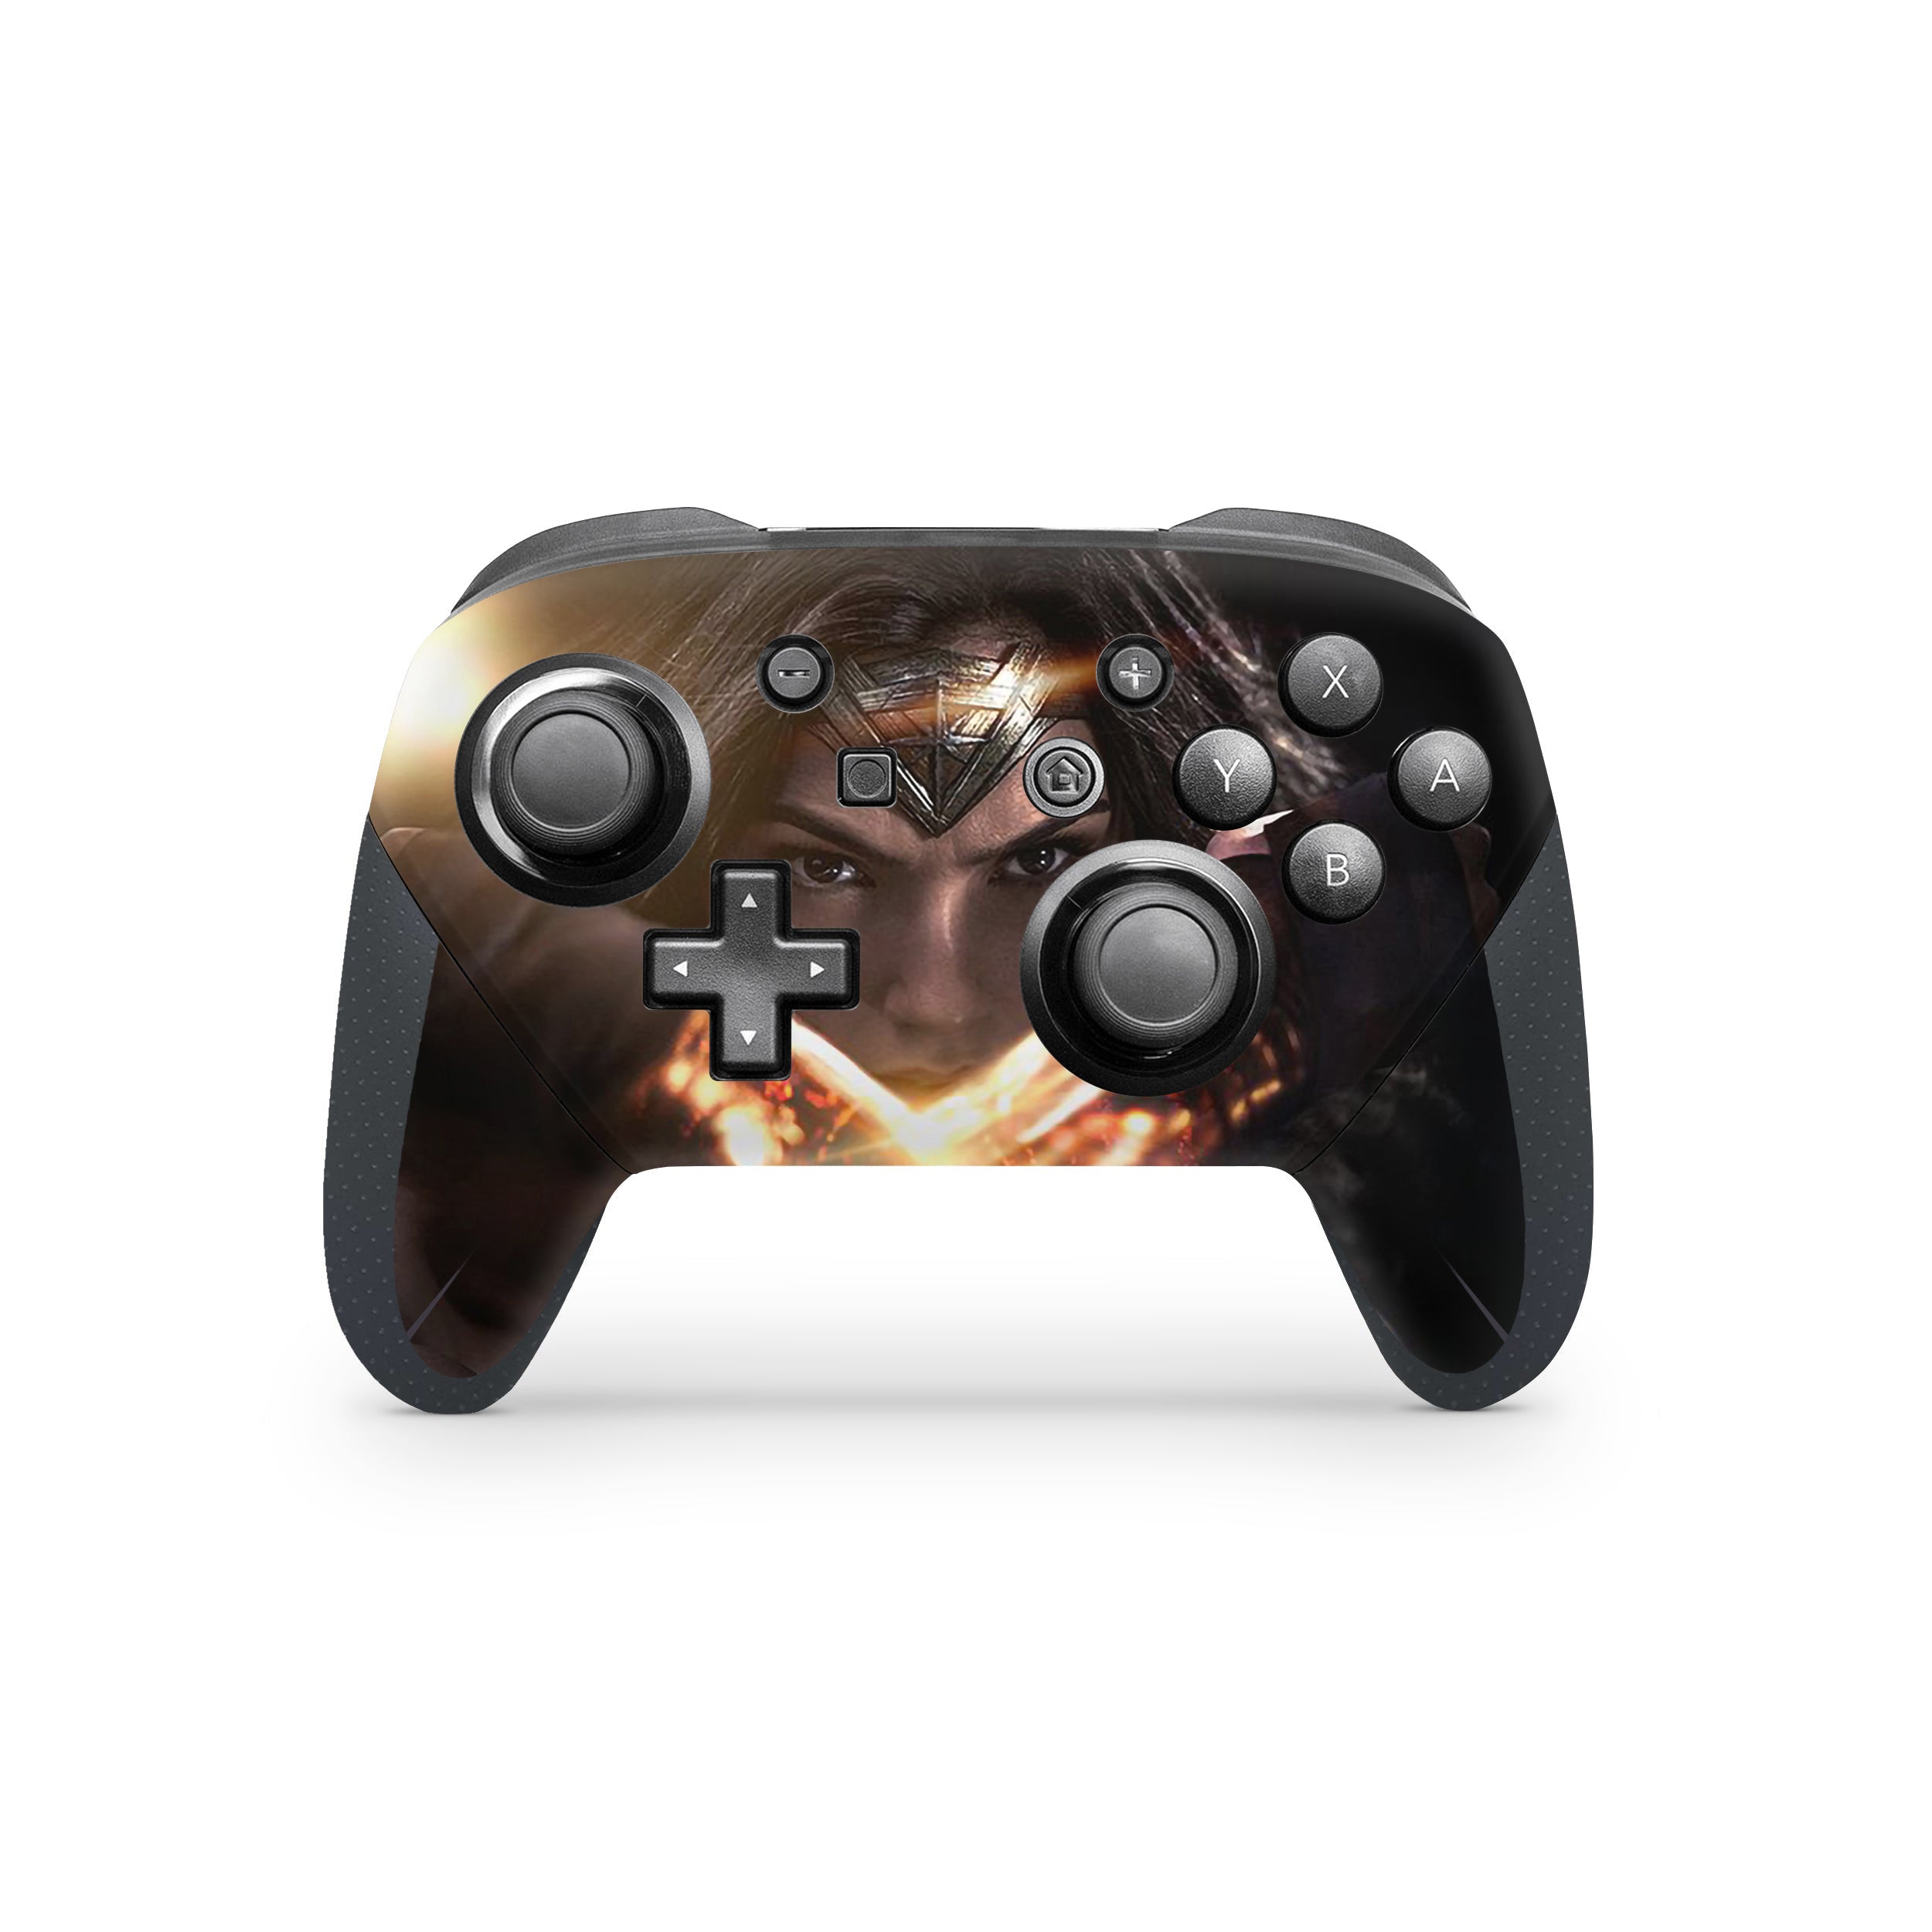 A video game skin featuring a DC Comics Wonder Woman design for the Switch Pro Controller.